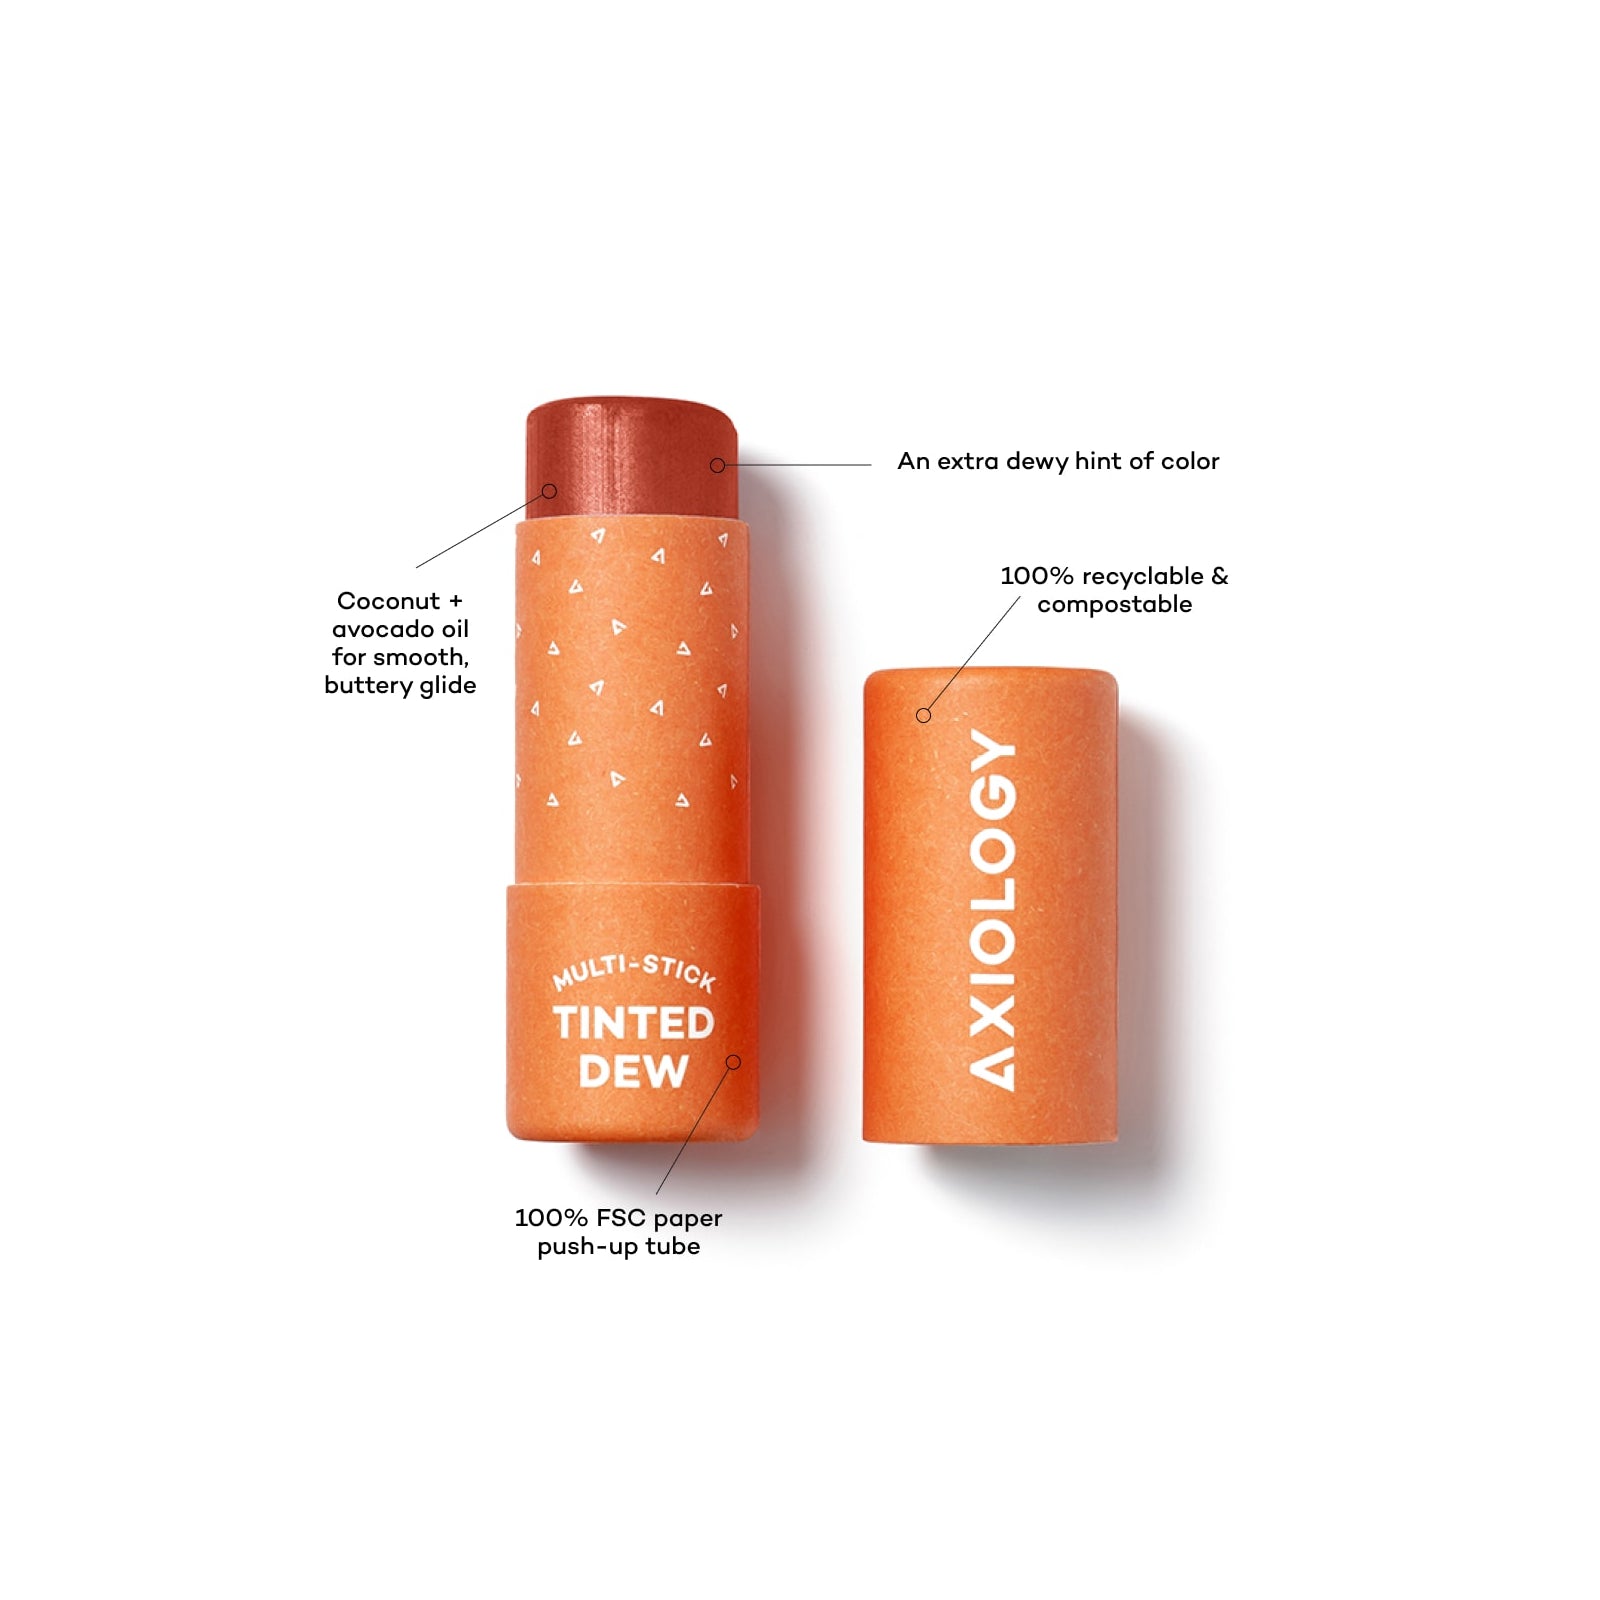 AXIOLOGY-Multi-Stick-Tinted-Dew-Strength